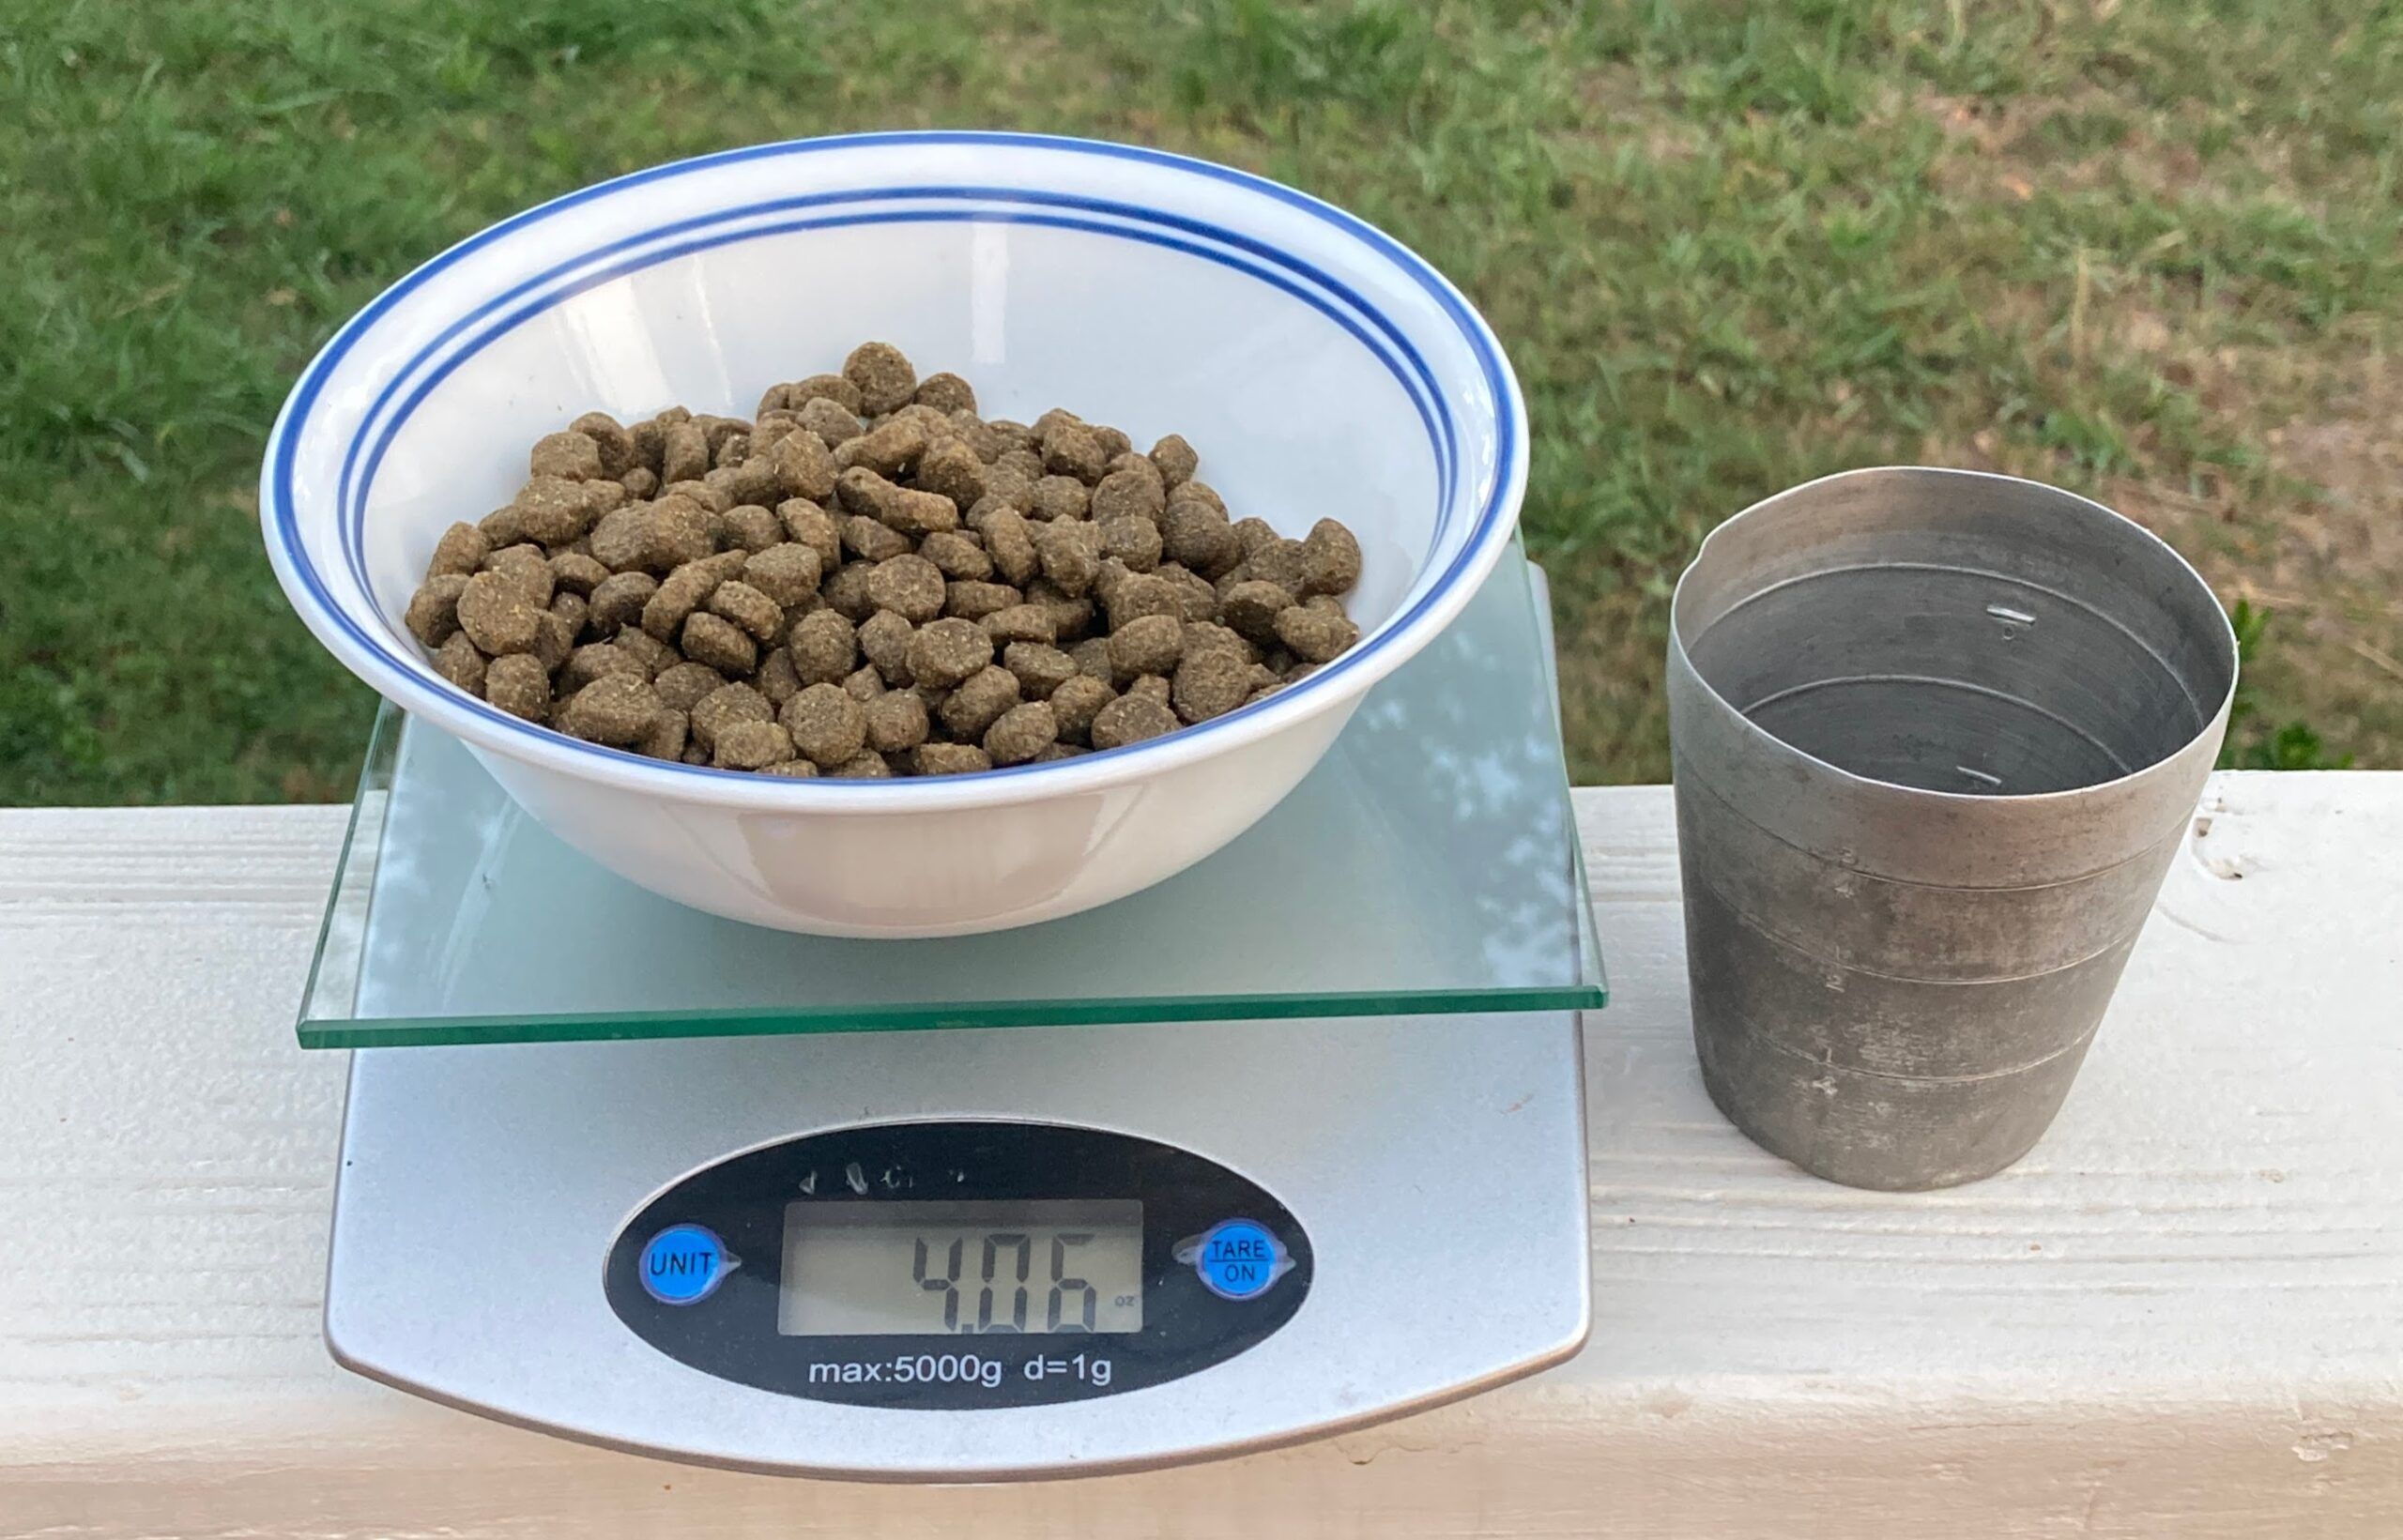 Dry Versus Liquid Measuring Cups and a Scale Maybe You Can't Live